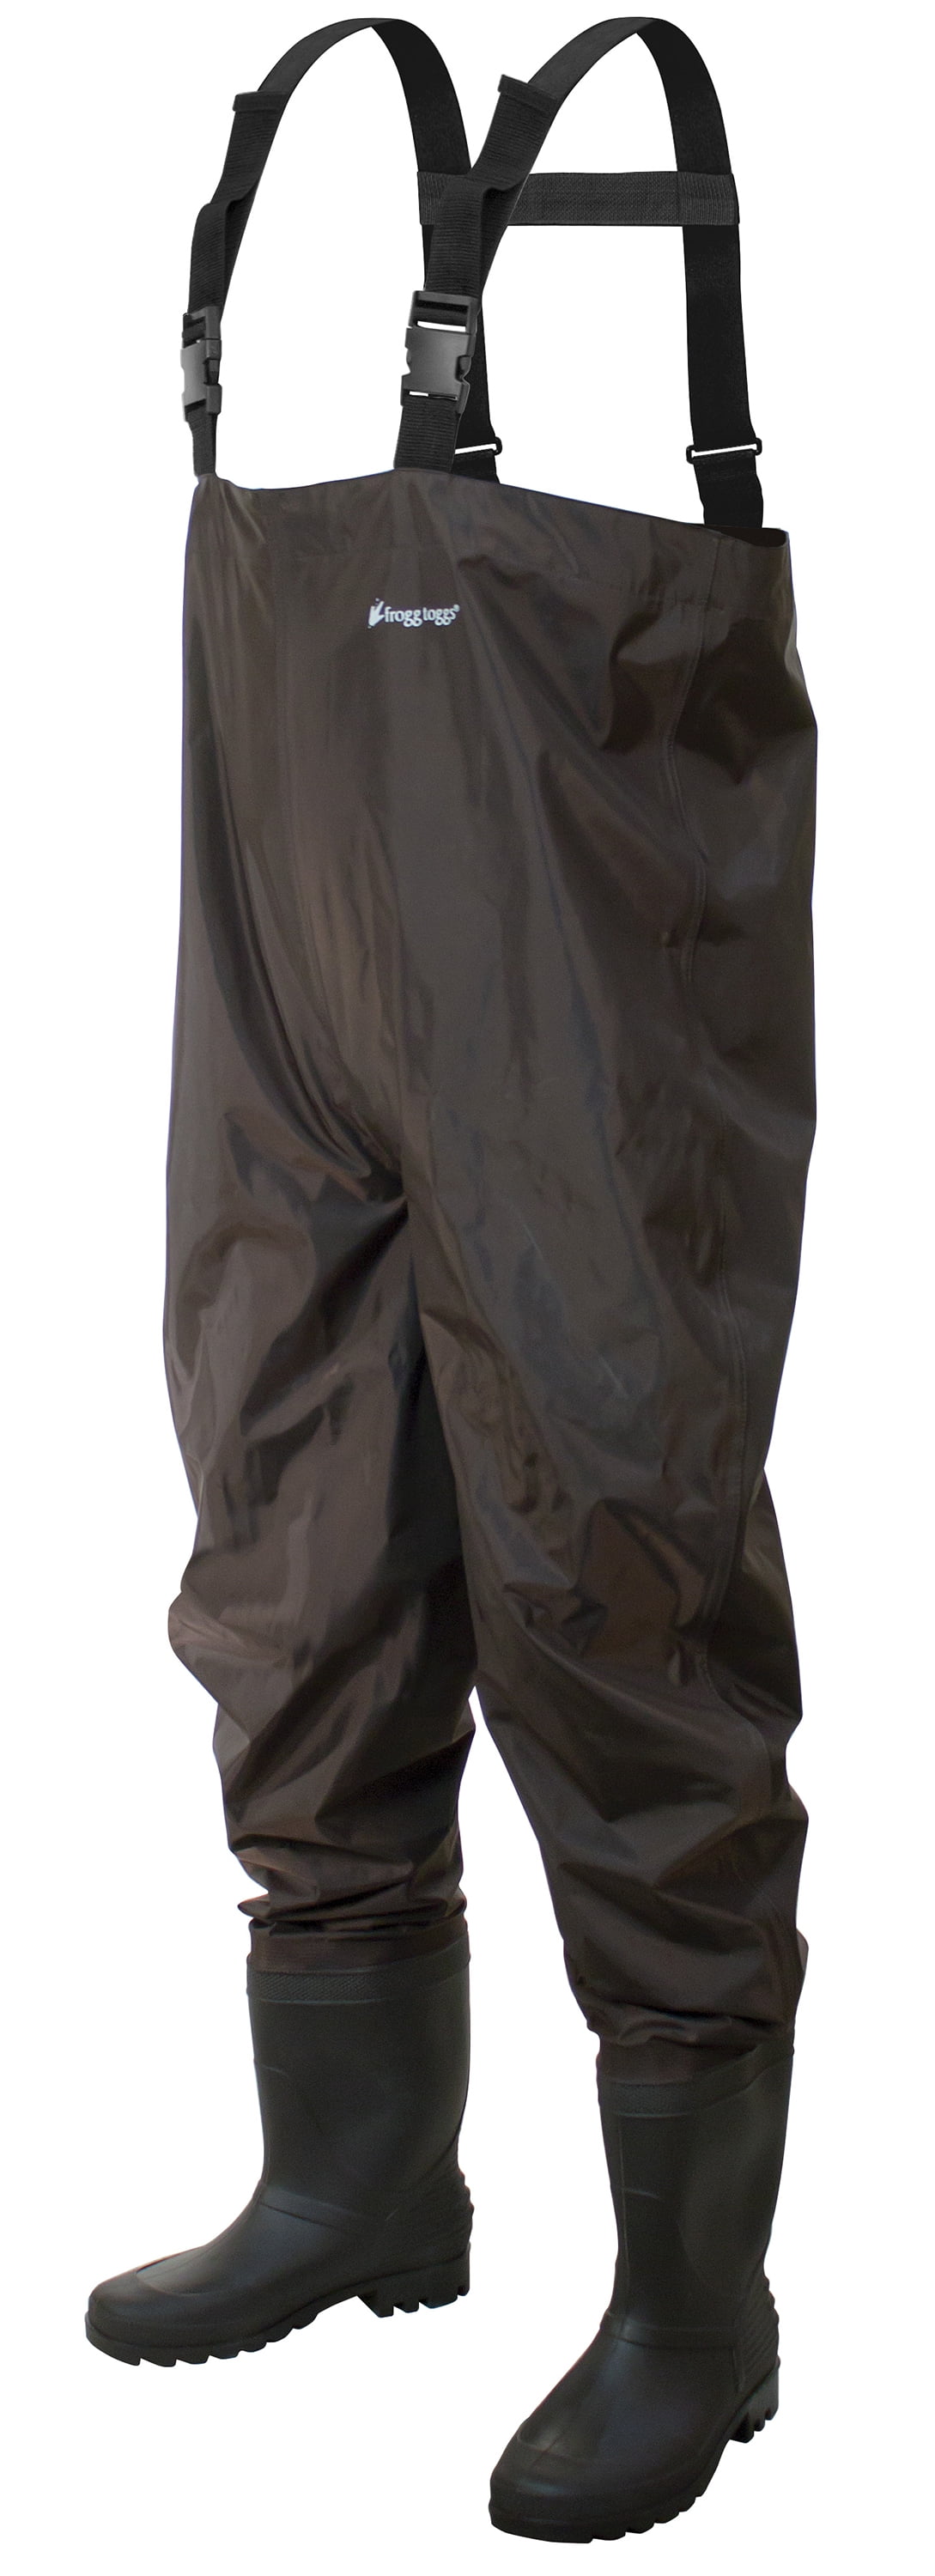 Frogg Toggs Cleated Rana 2 Pvc Chest Fishing Wader, Size 9, Brown - Walmart...